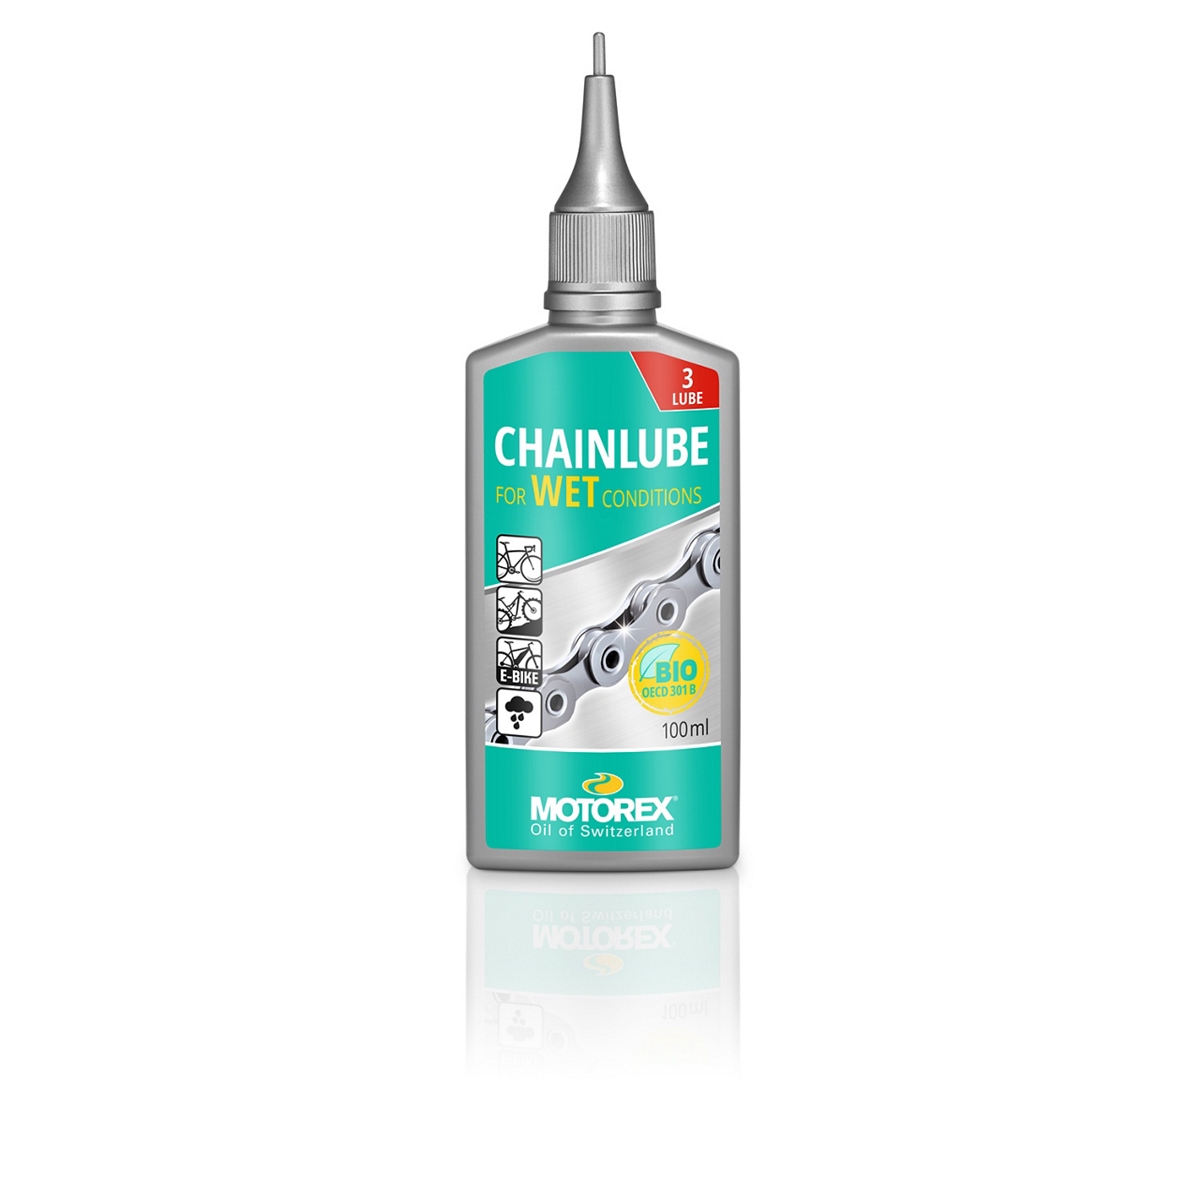 Chainlube Wet Lubricant Wet Conditions 100ml